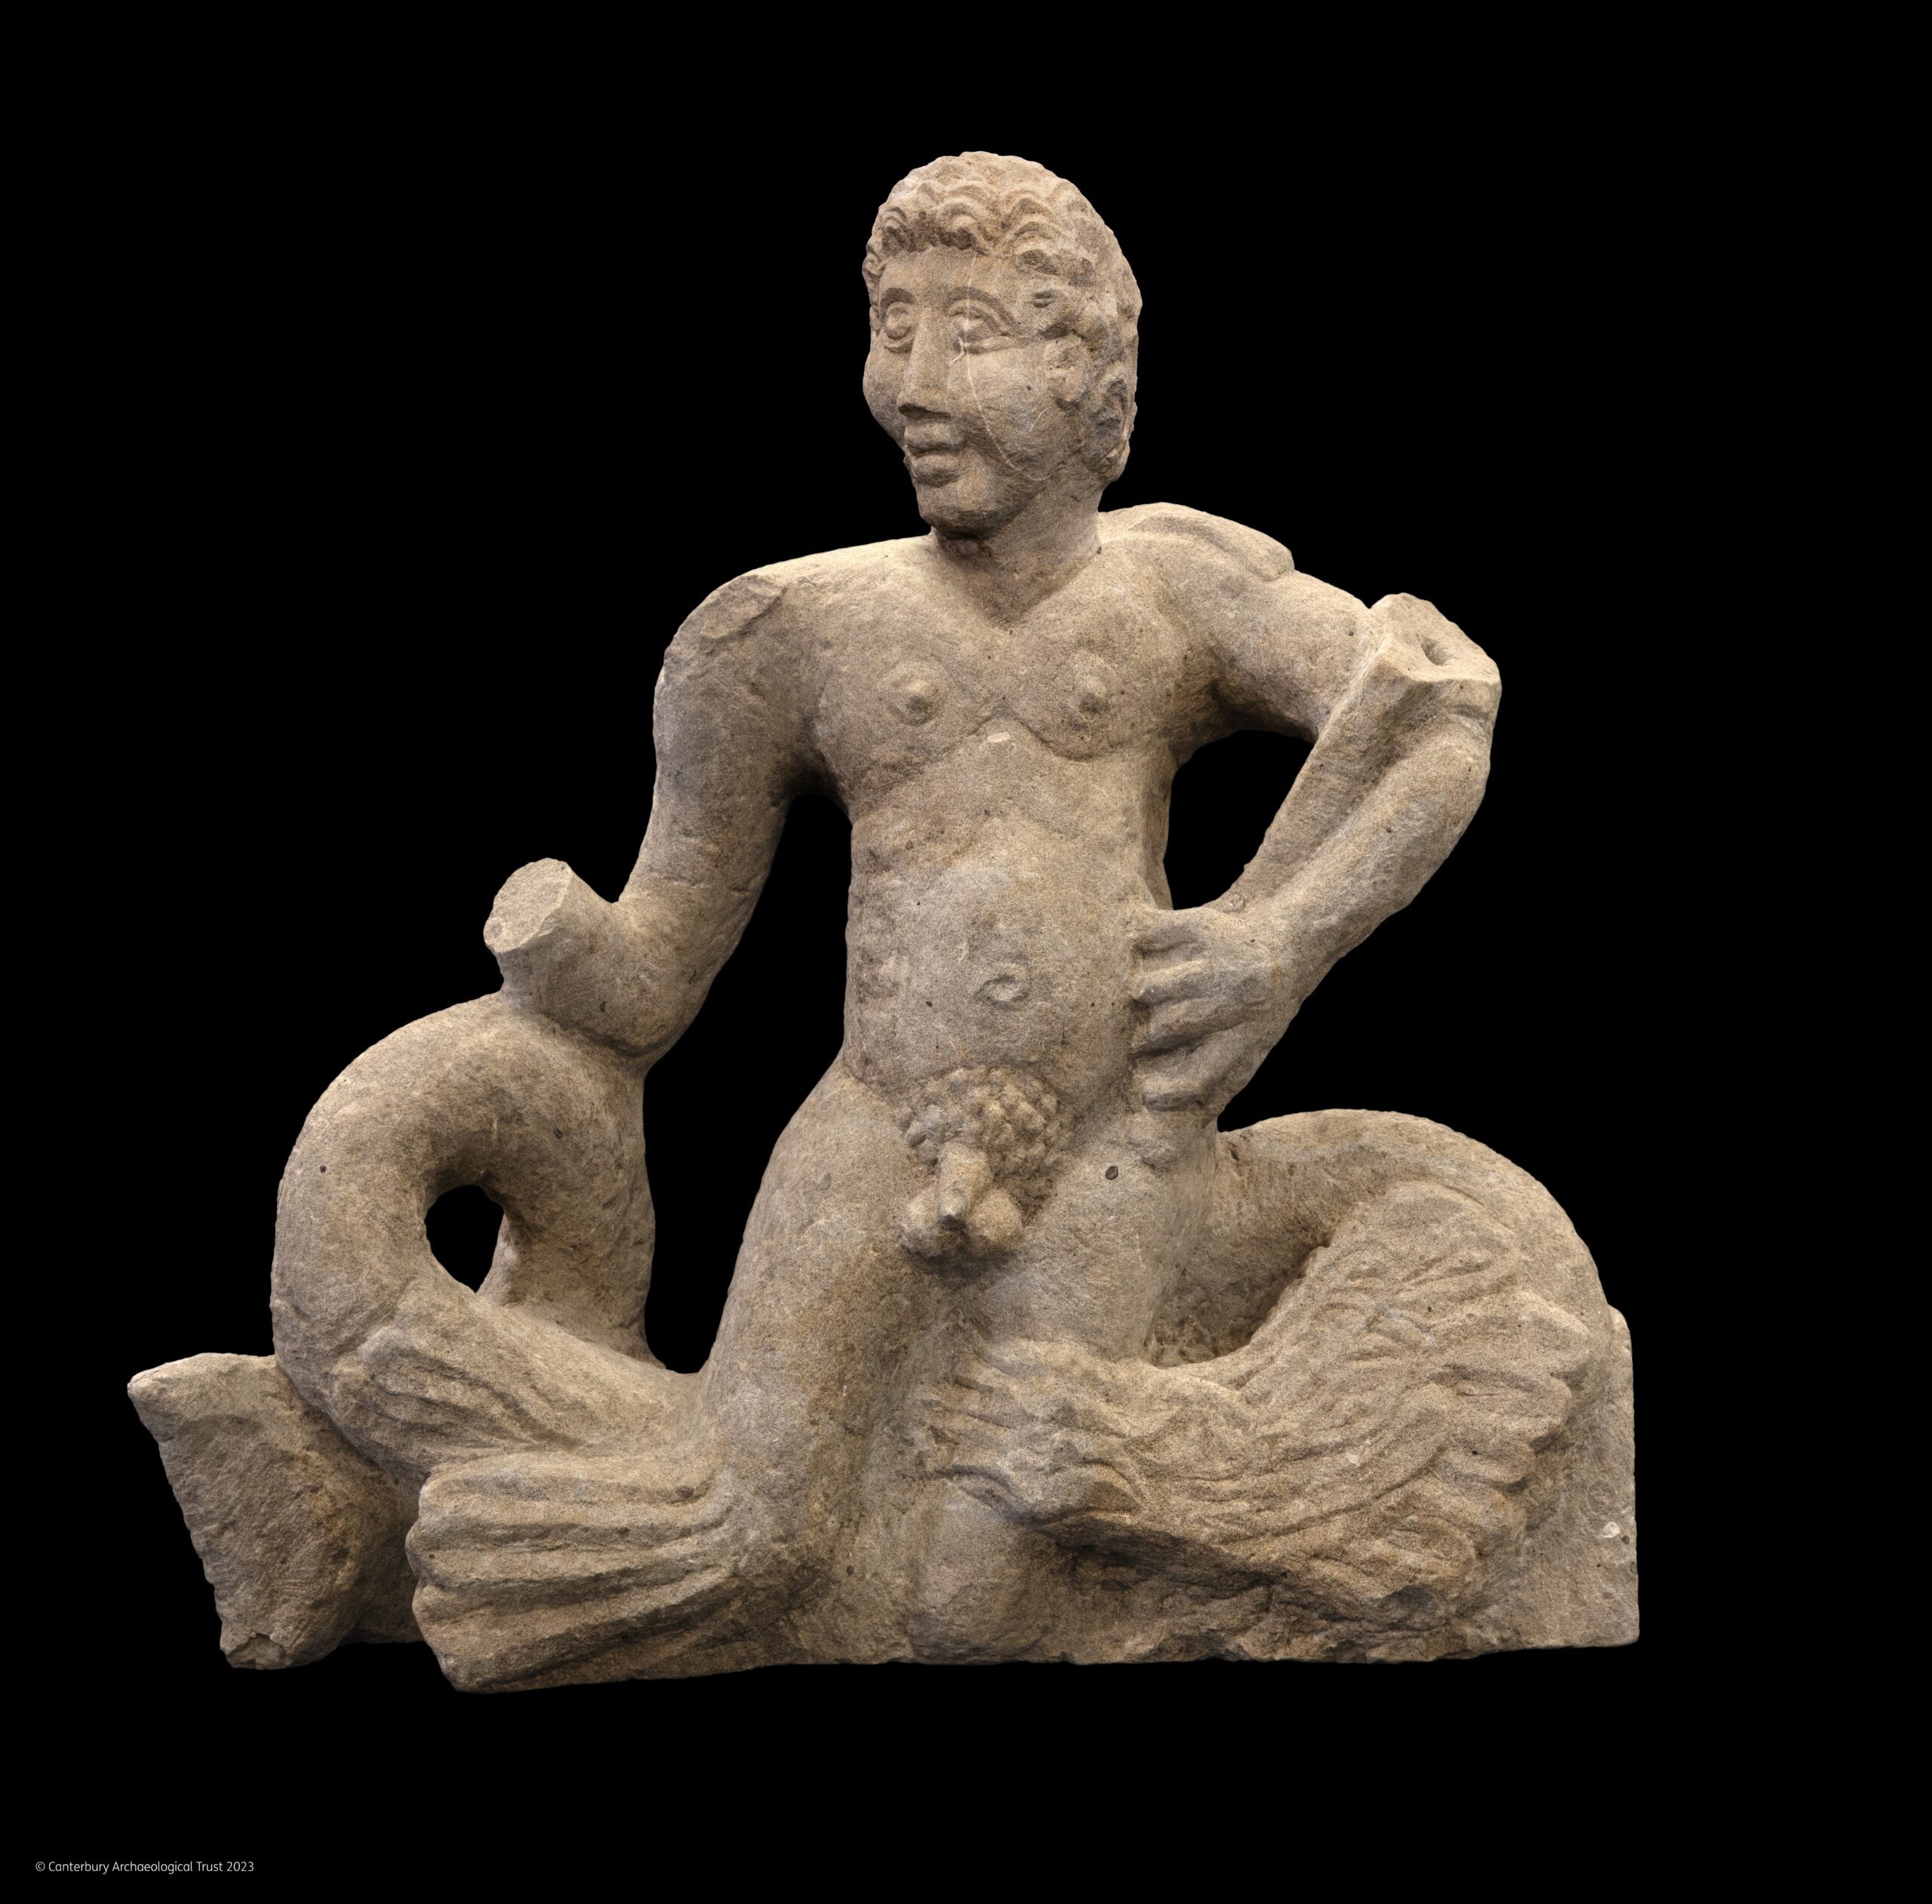 Copy of Roman statue of Triton discovered during archaeological excavations in Teynham Kent